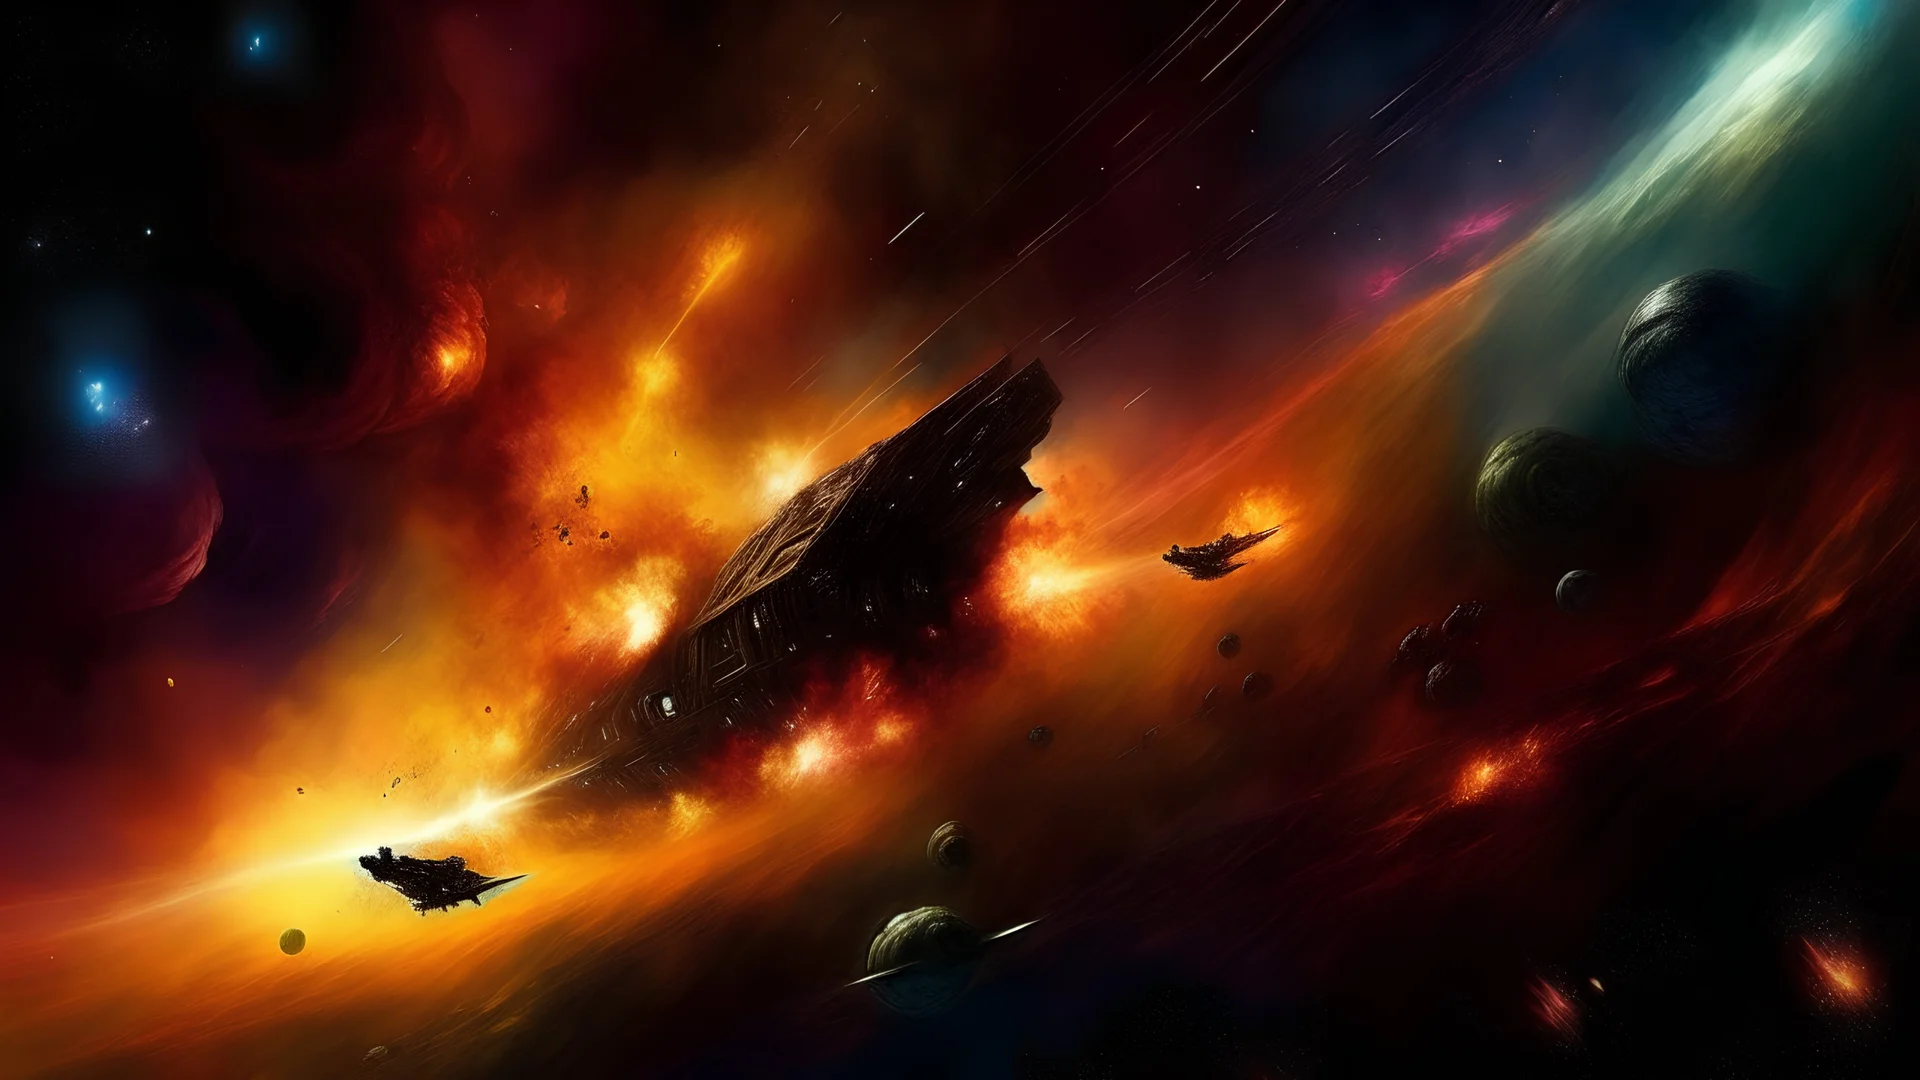 Attack spaceships on fire off the shoulder of Orion Nebula, by Dean Ellis, highly detailed, high quality, stunning, epic